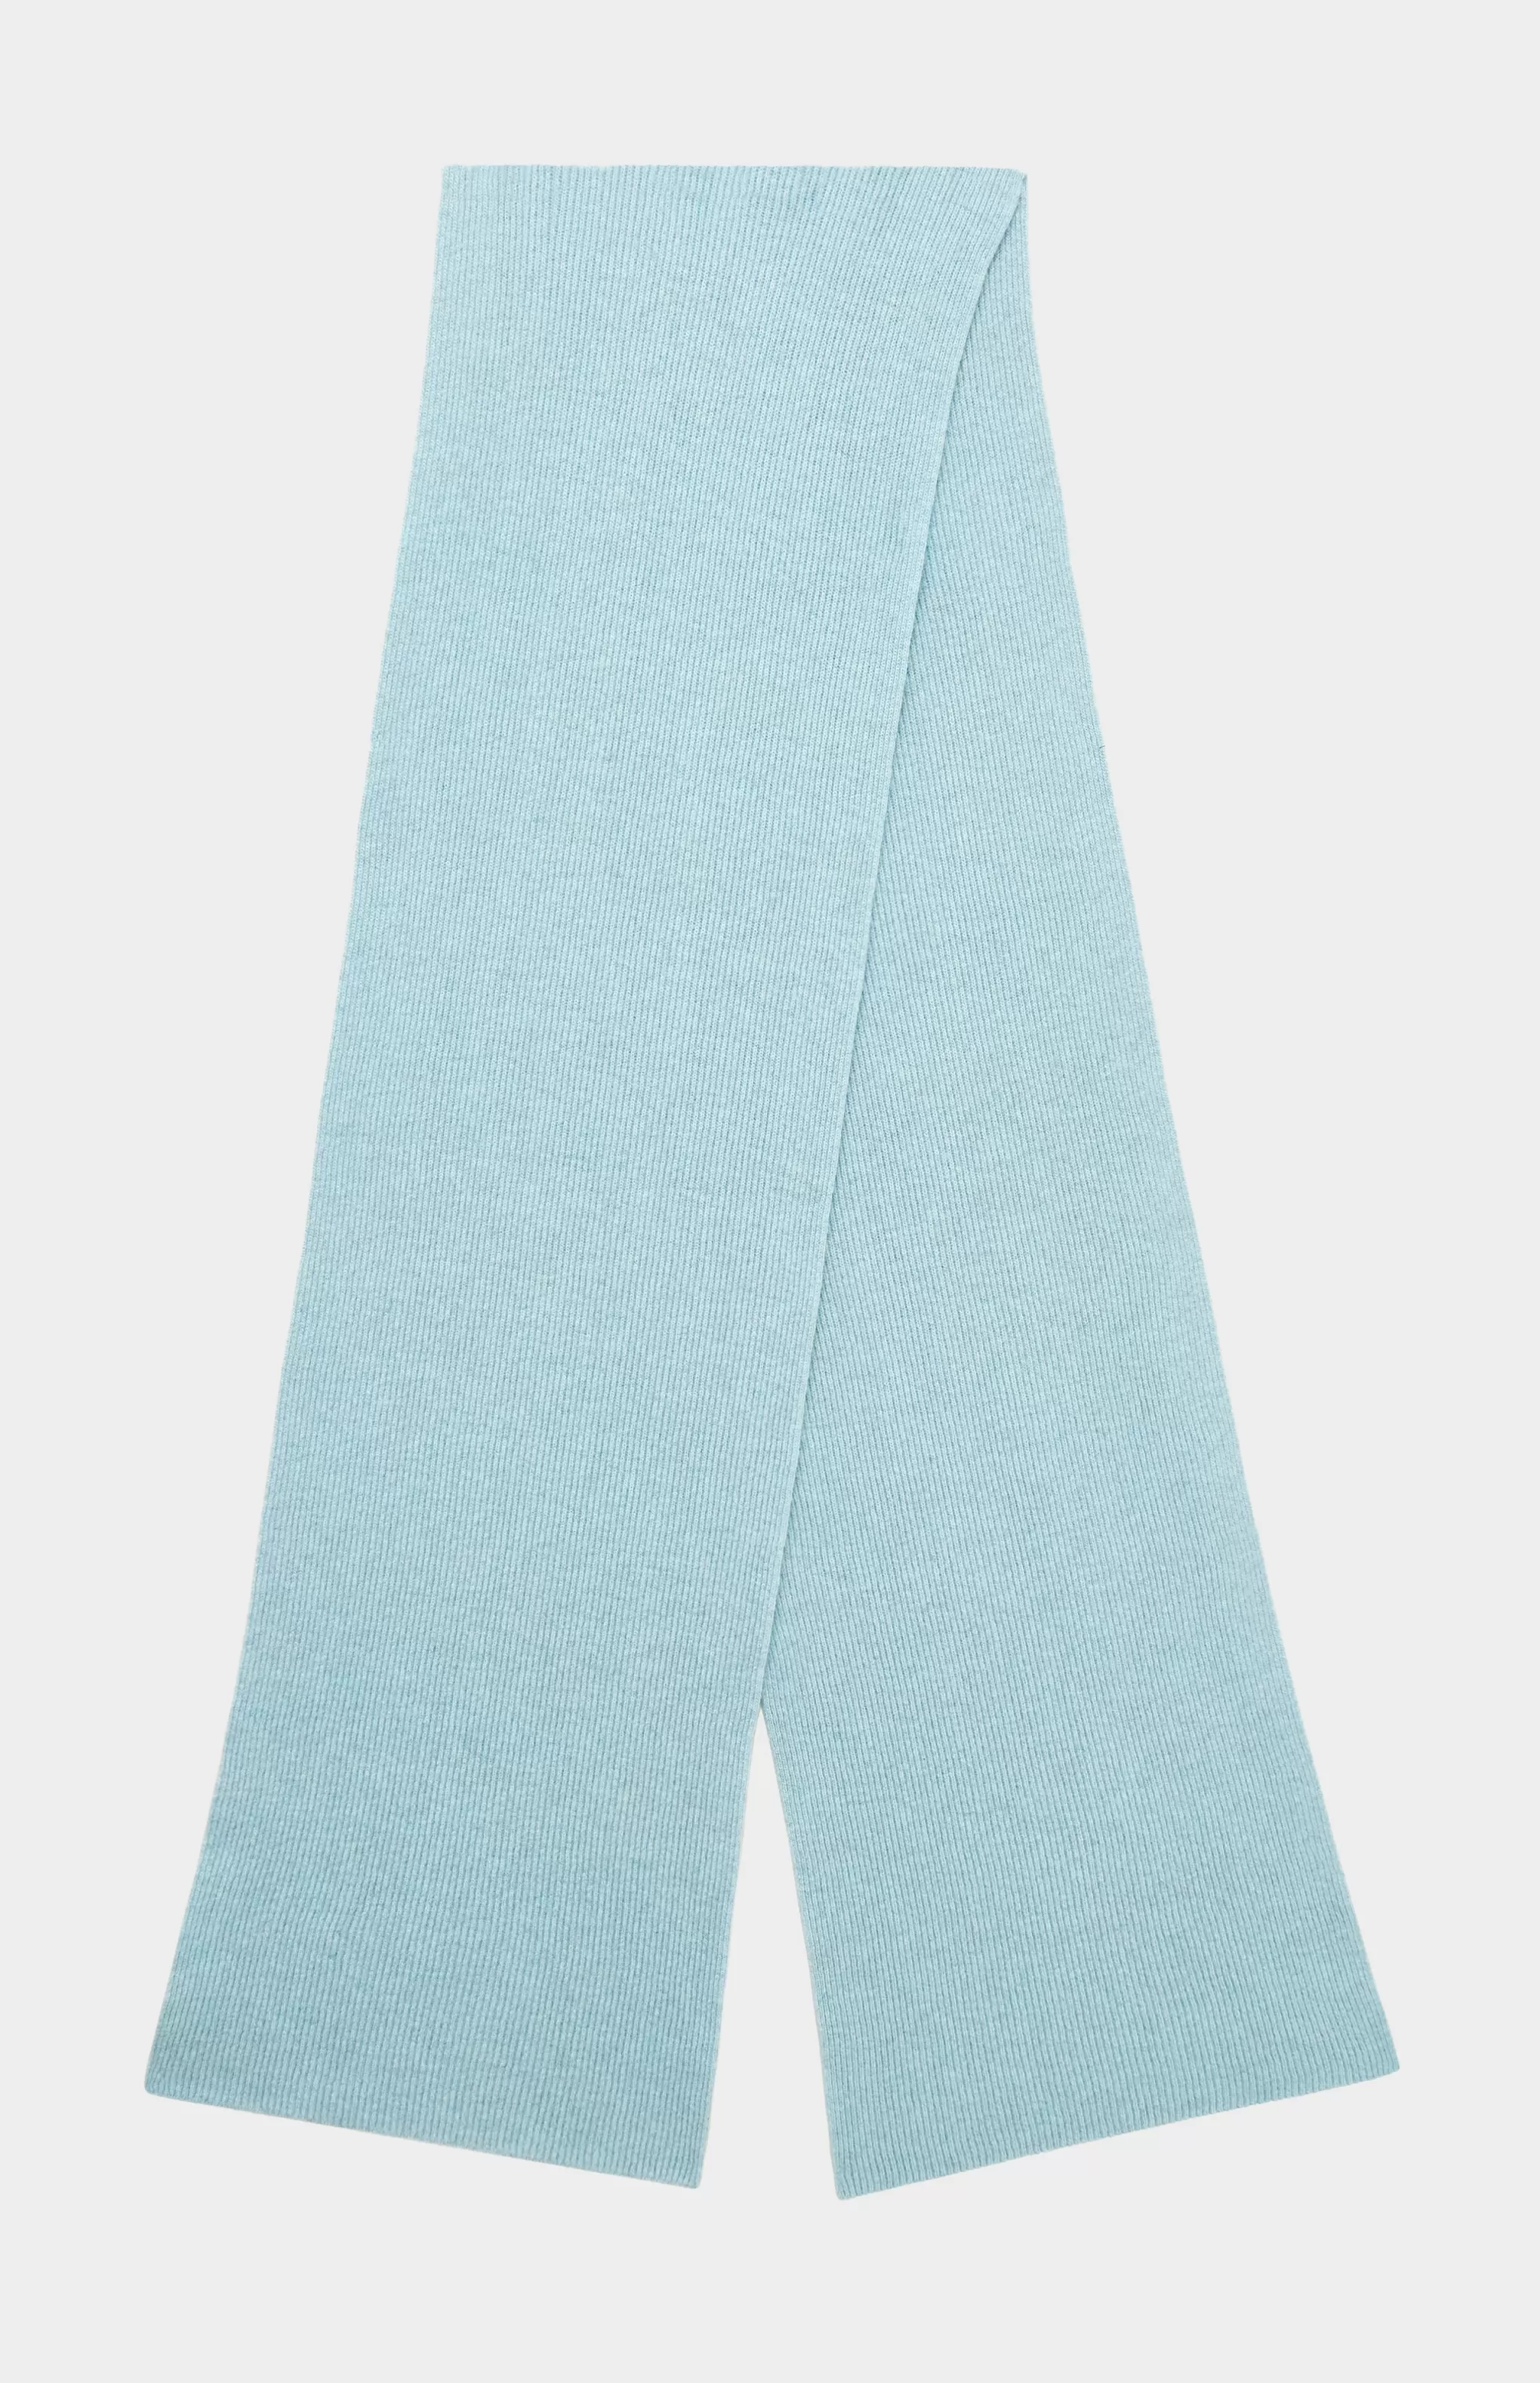 Hot Cashmere Blend Scarf With Allover Fine Rib In Aqua Melange Men/Women Gifts For Women